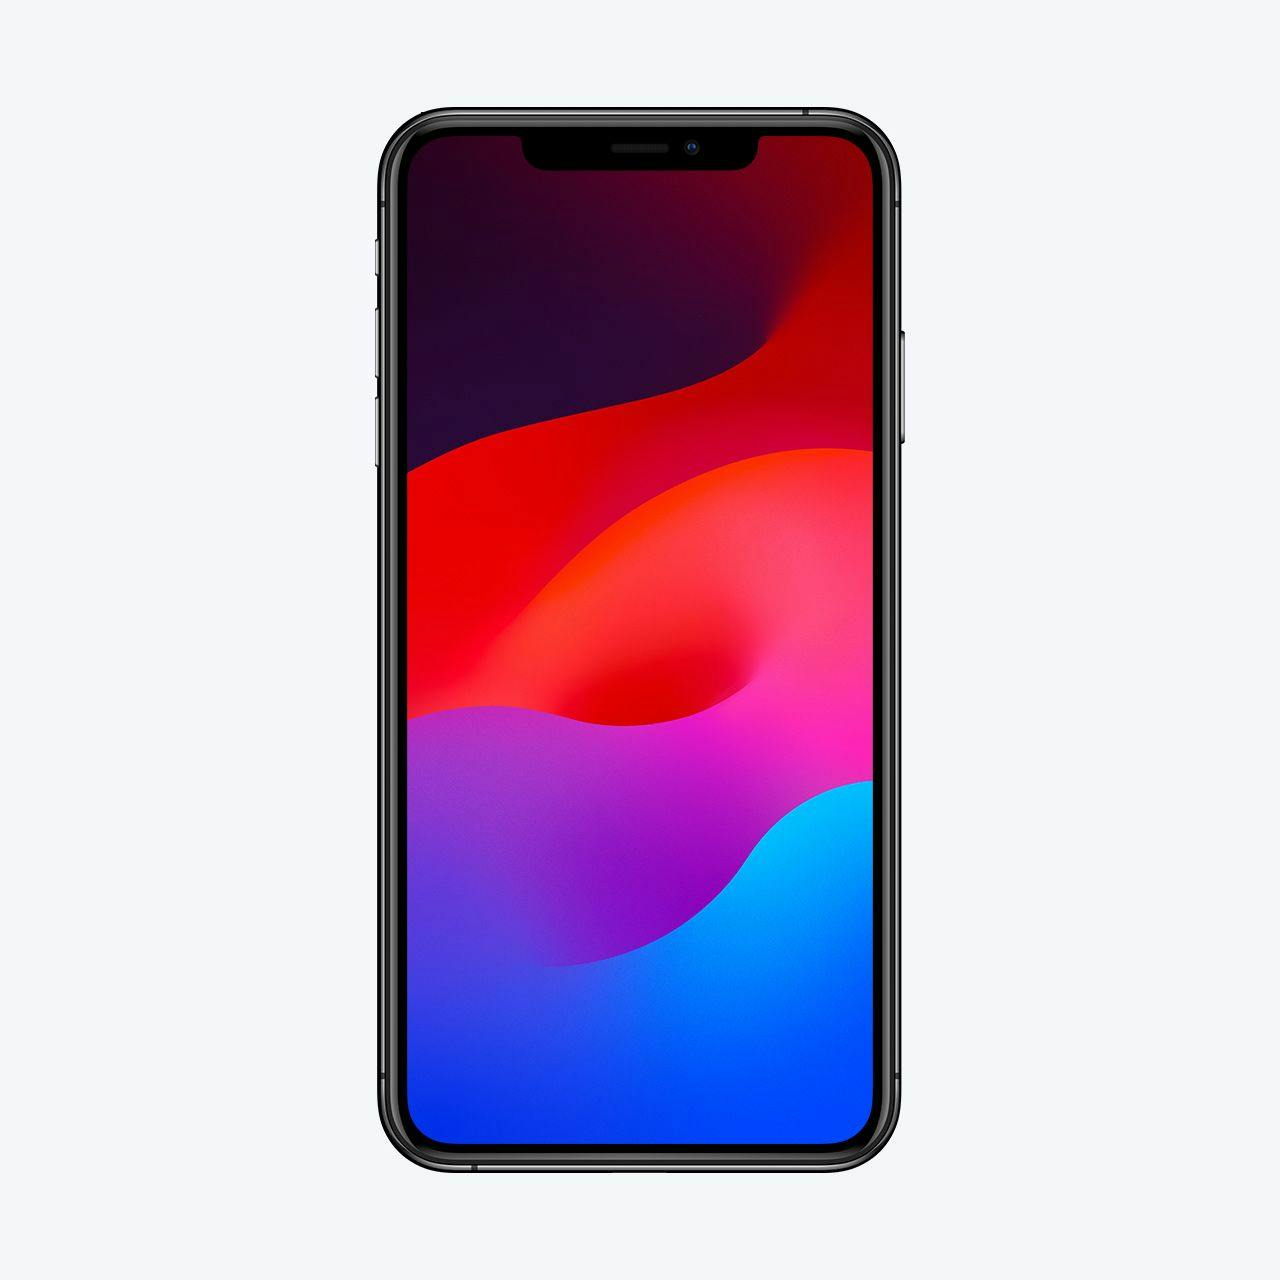 Image of iPhone 11 Pro Max.